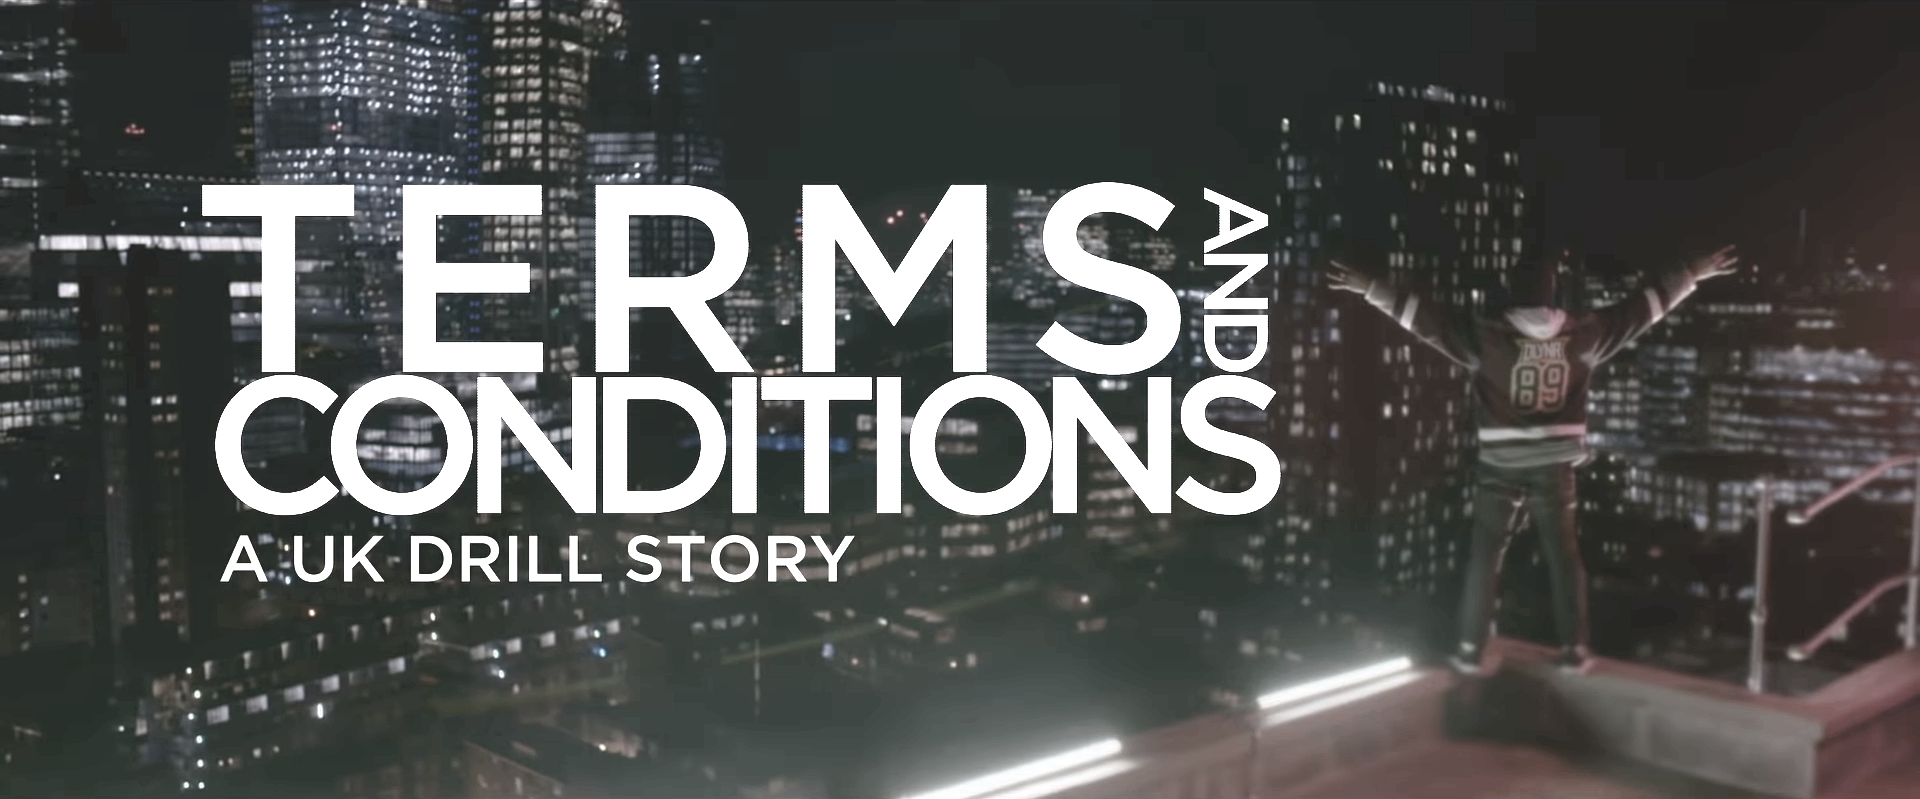 YouTube’s new original documentary ‘Terms and Conditions’ isn’t about what you think